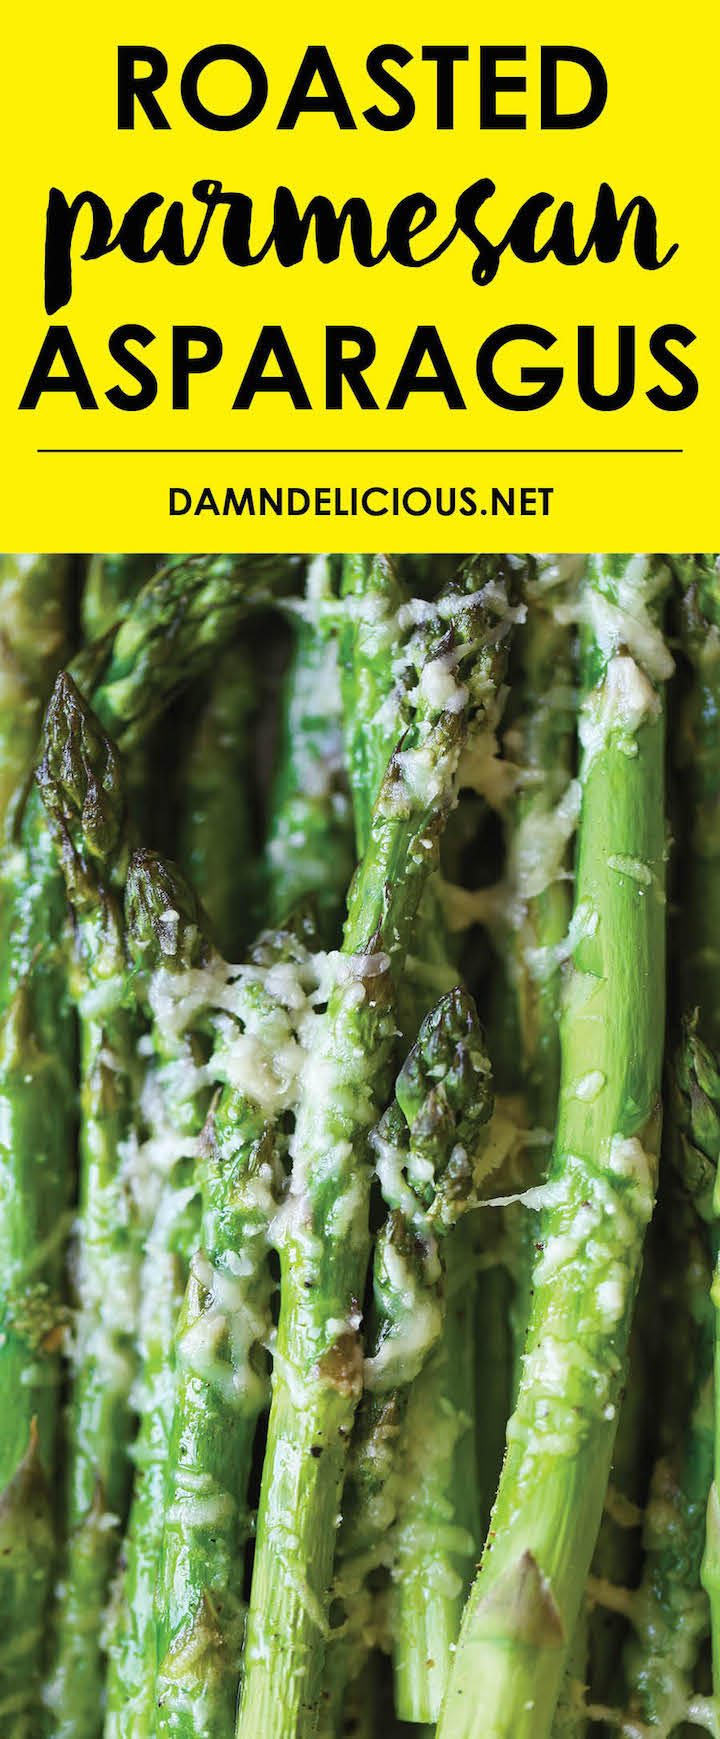 Roasted Parmesan Asparagus - This is one of the easiest and most flavorful ways to prepare this veggie. And you know you can't ever go wrong with Parmesan!